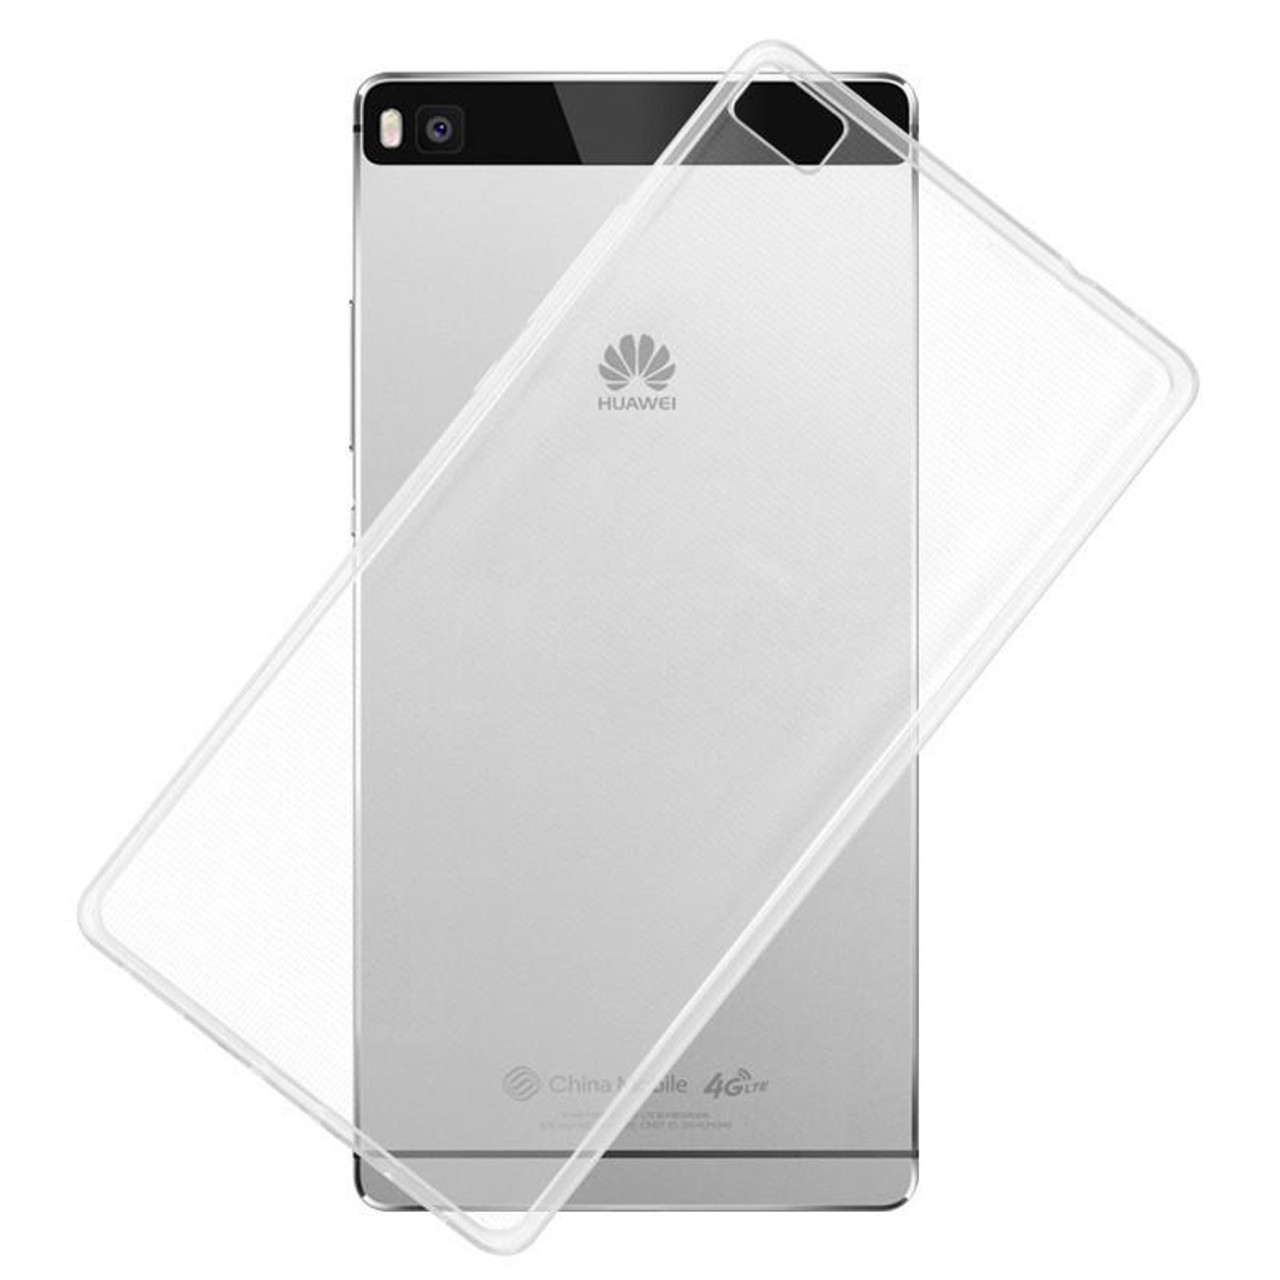 wang Verdragen vleet Huawei P8 Silicone Case - Parallel Imported